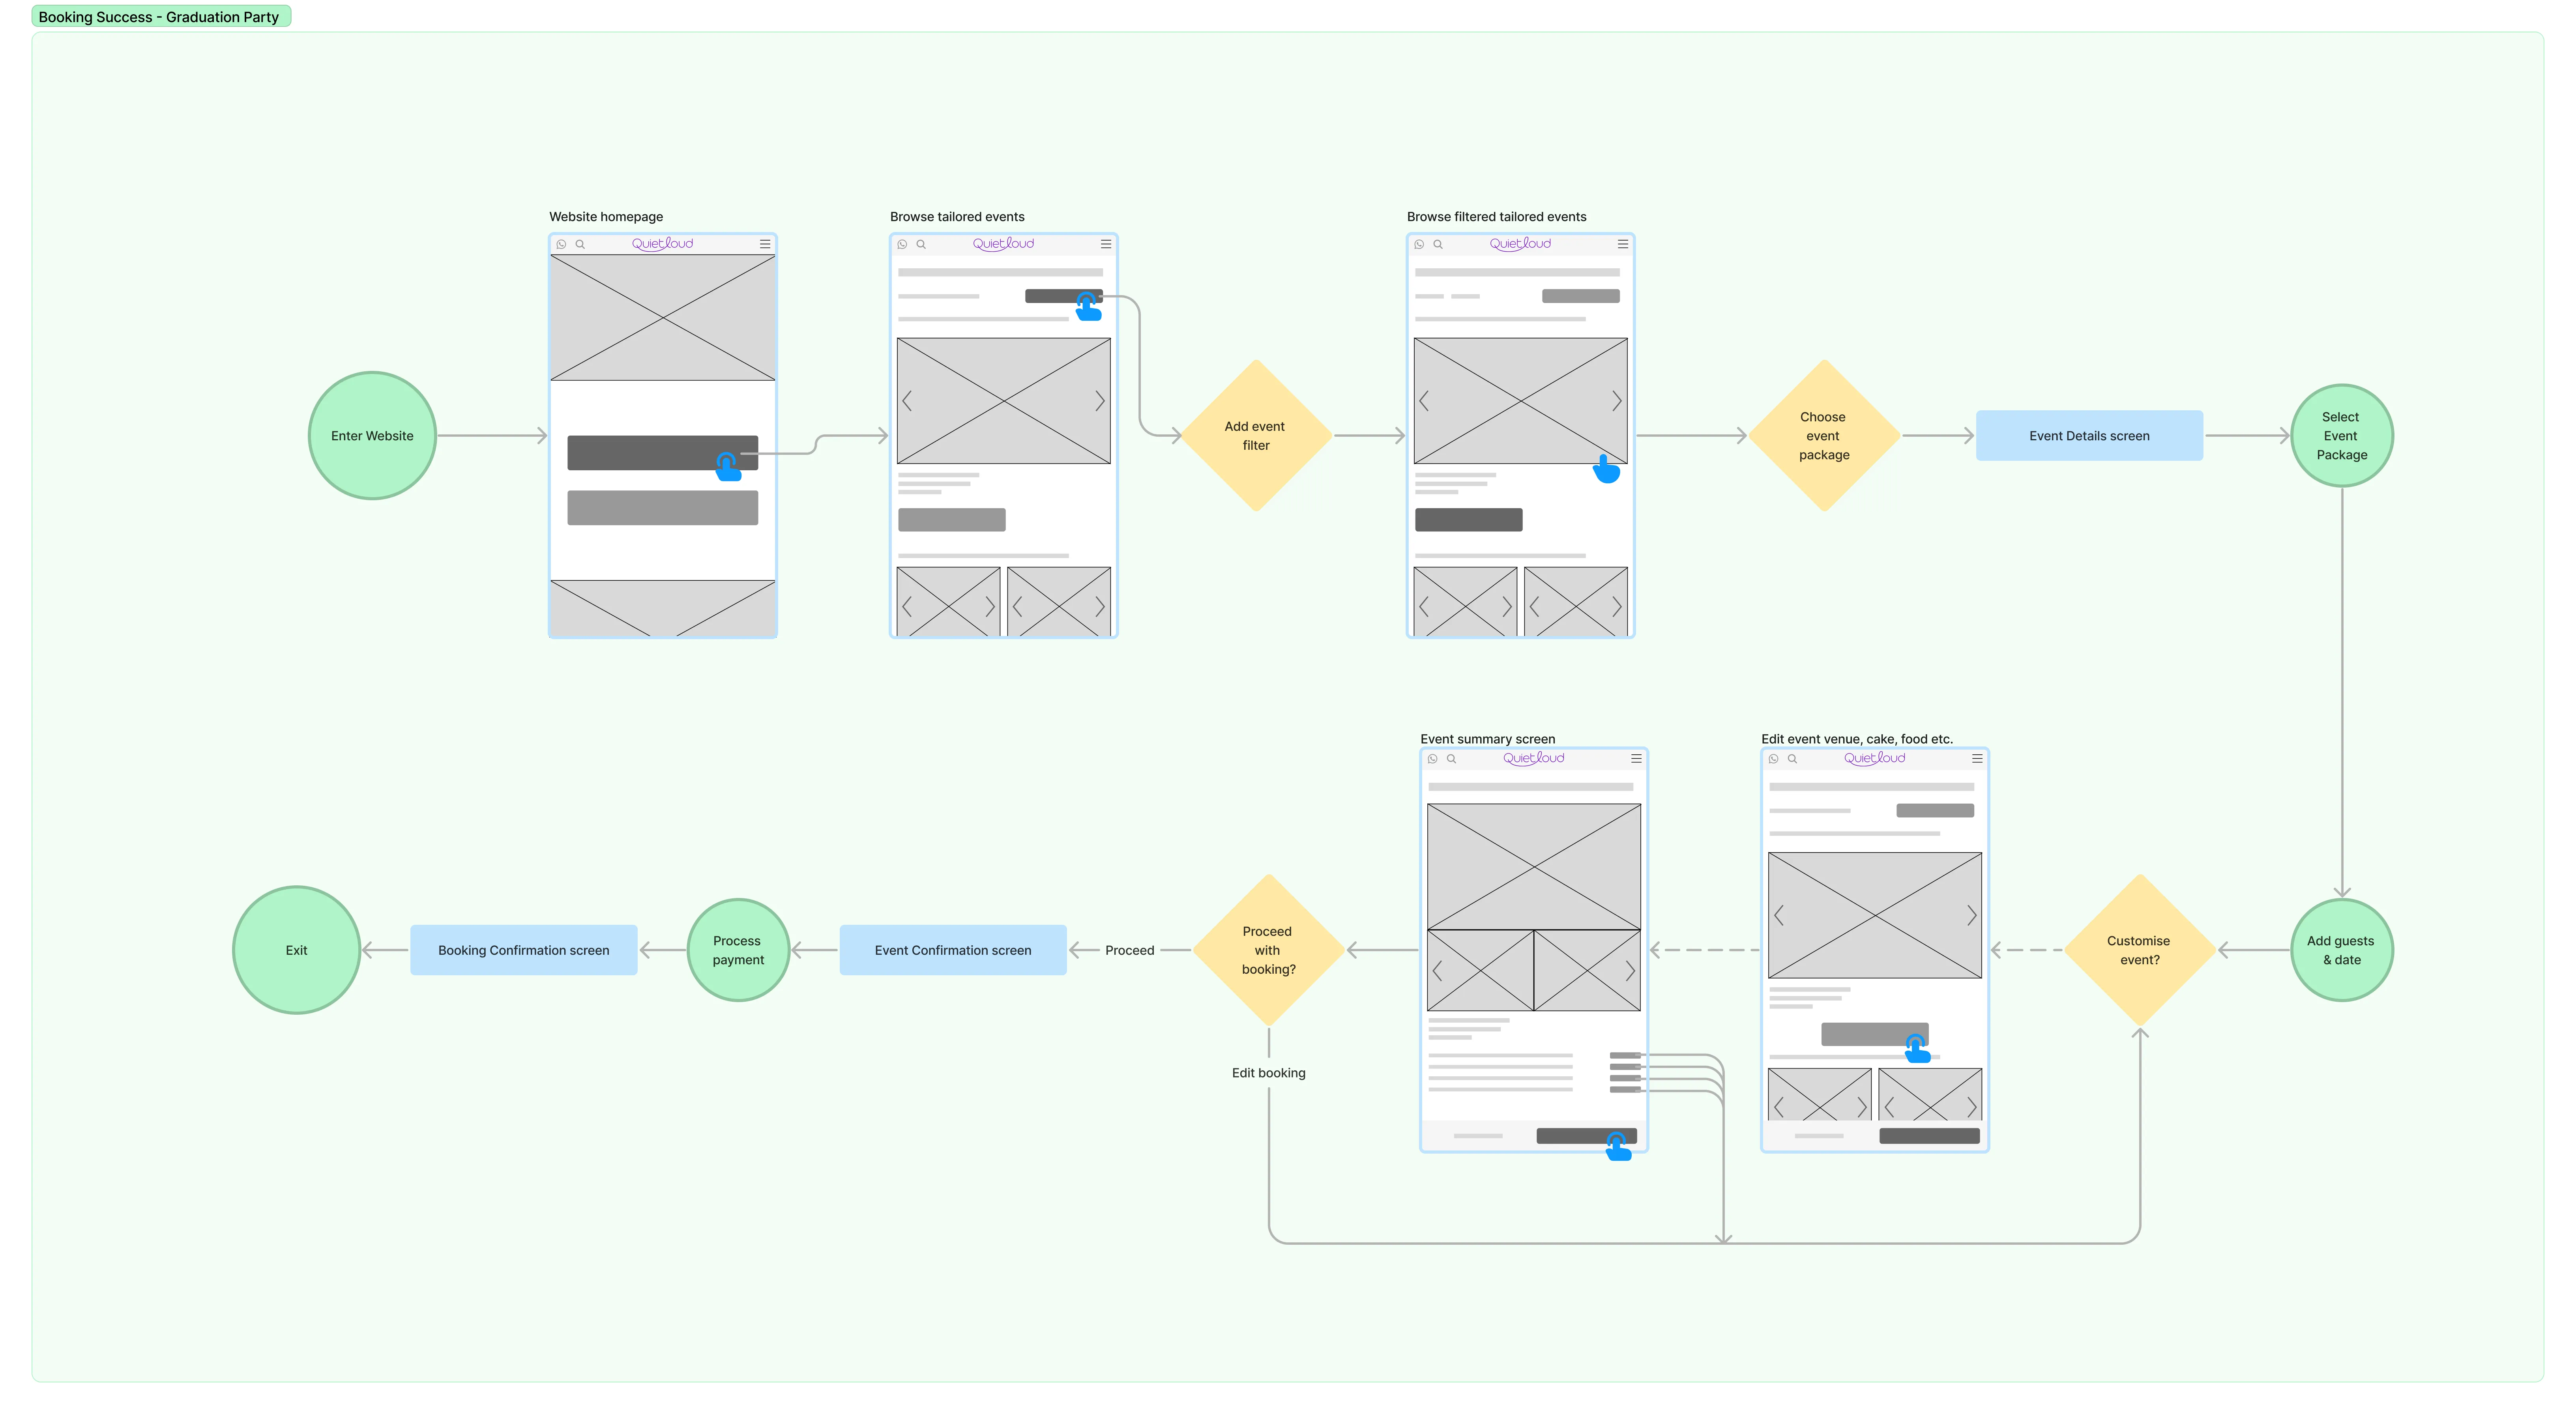 Low fidelity wireframe user flow for a booking journey.